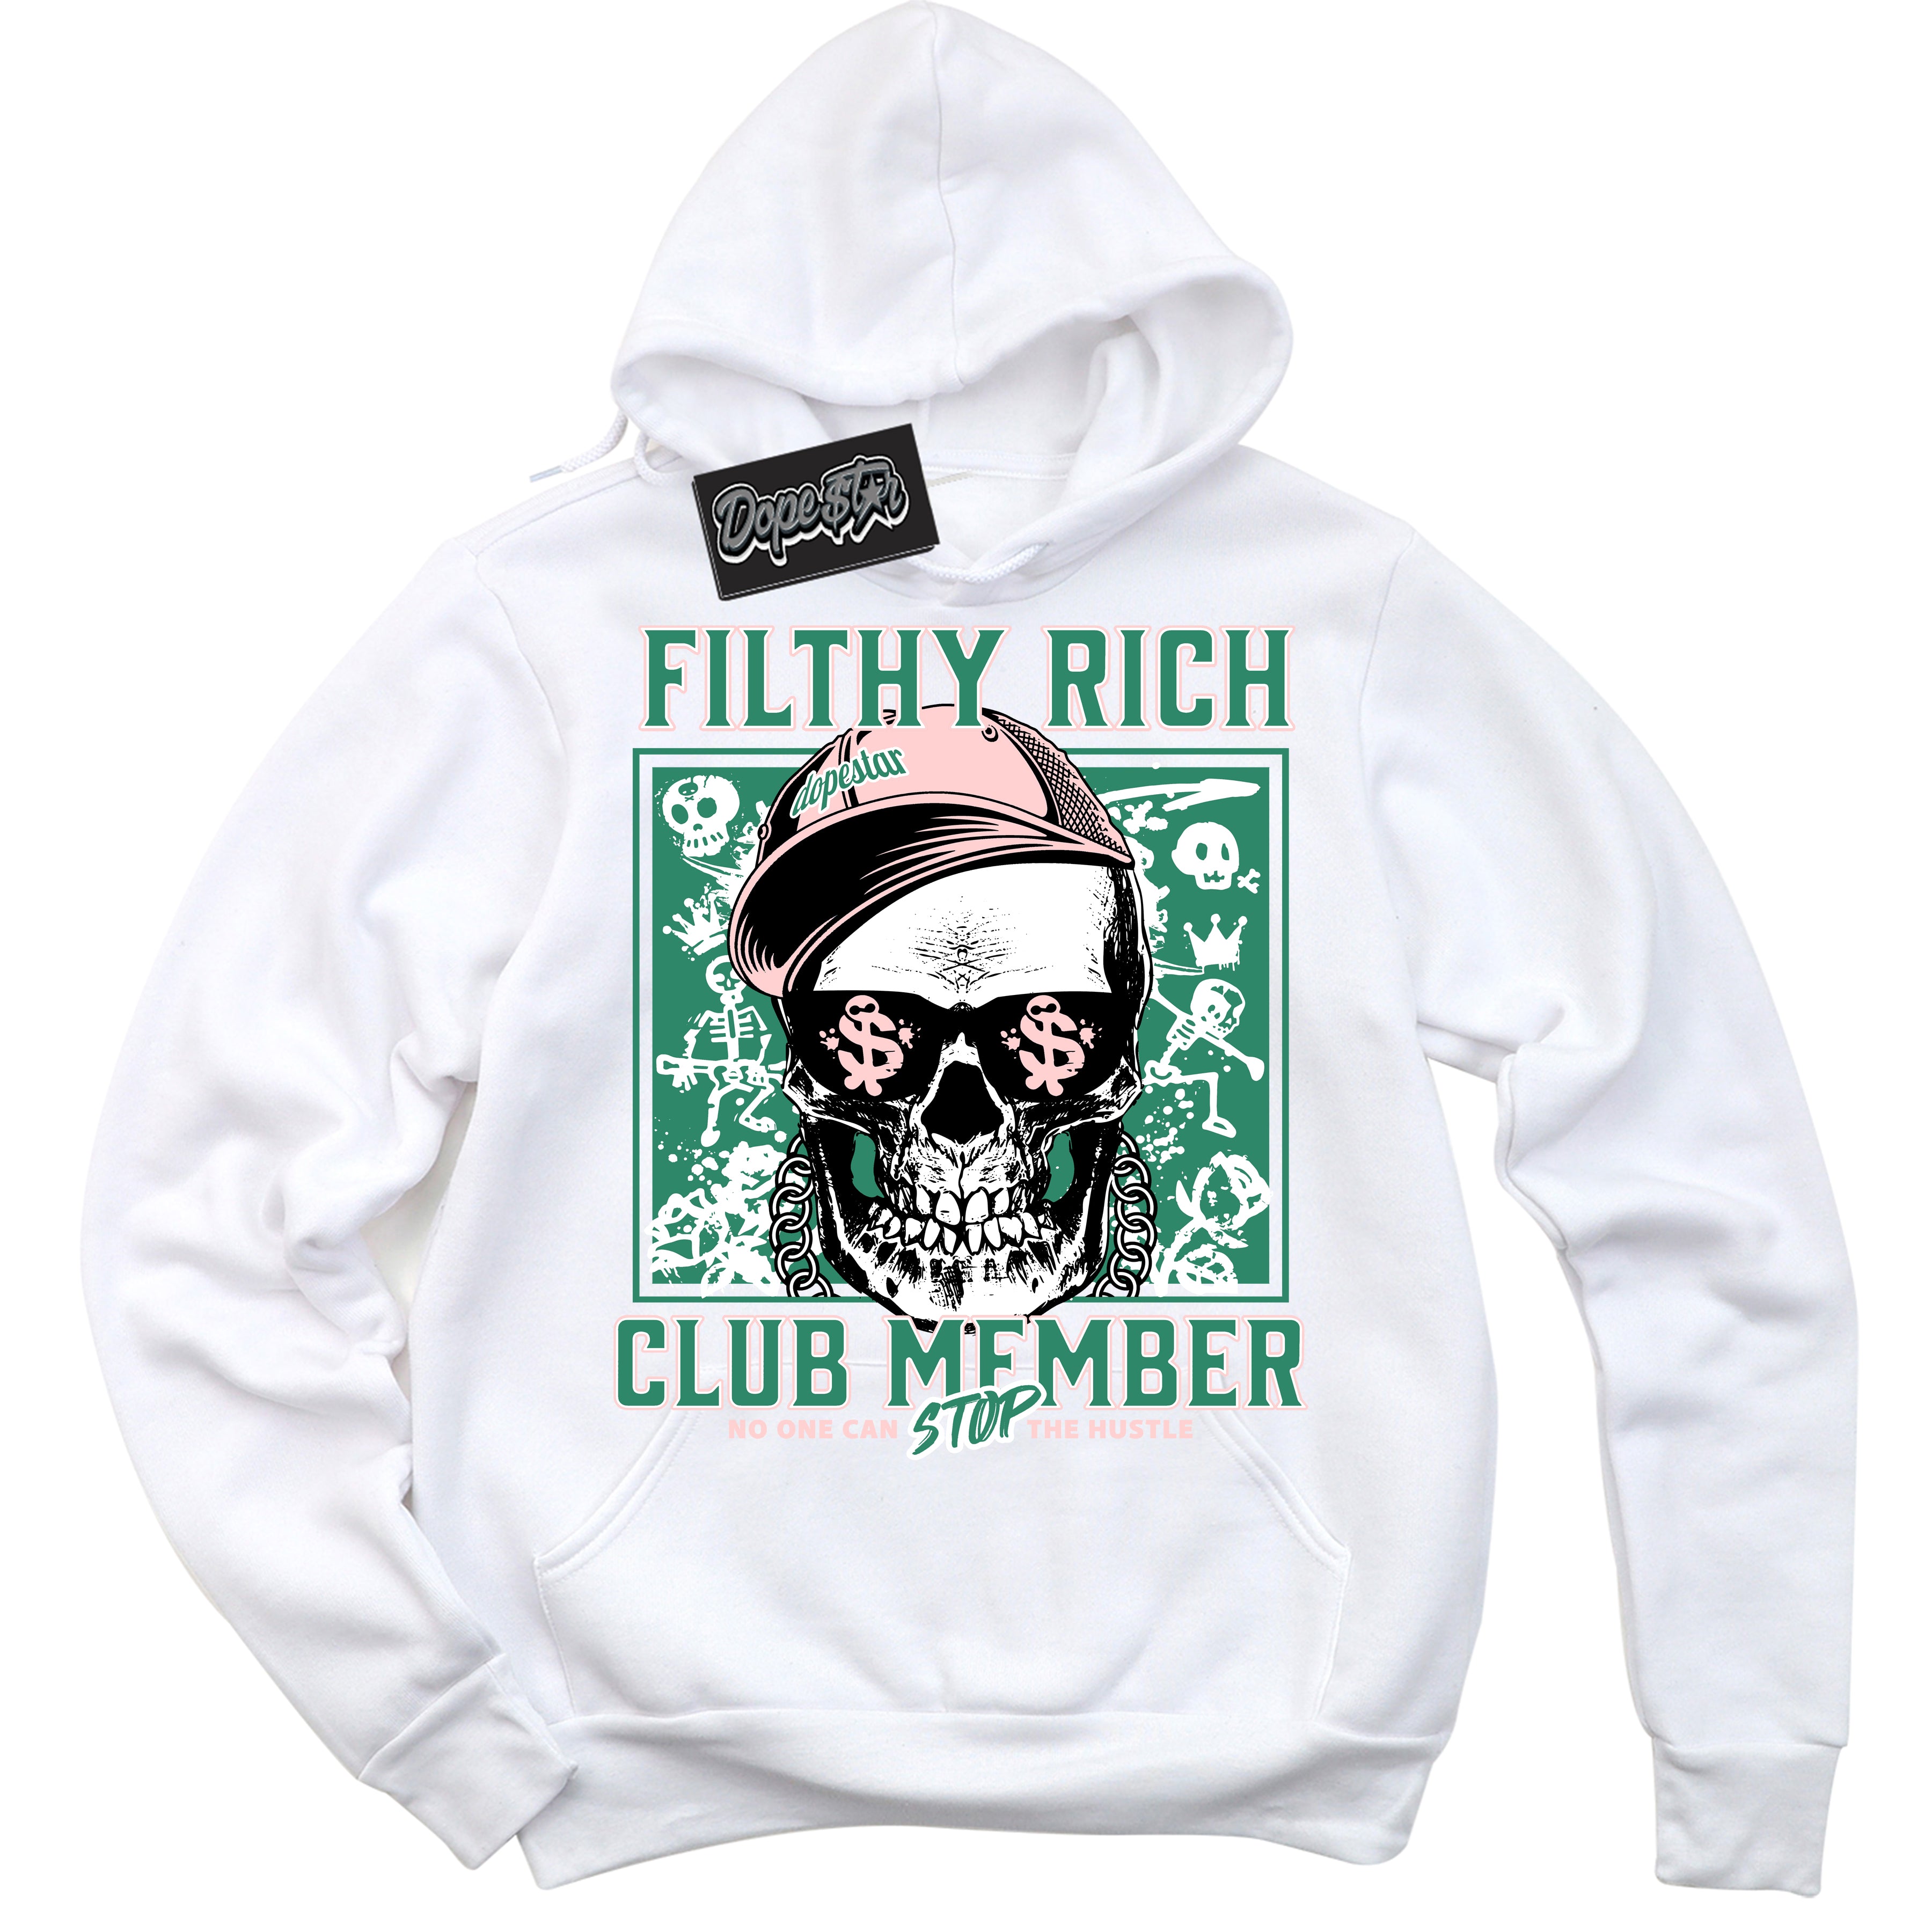 Cool White Hoodie with “ Filthy Rich ”  design that Perfectly Matches Malachite Dunk Sneakers.